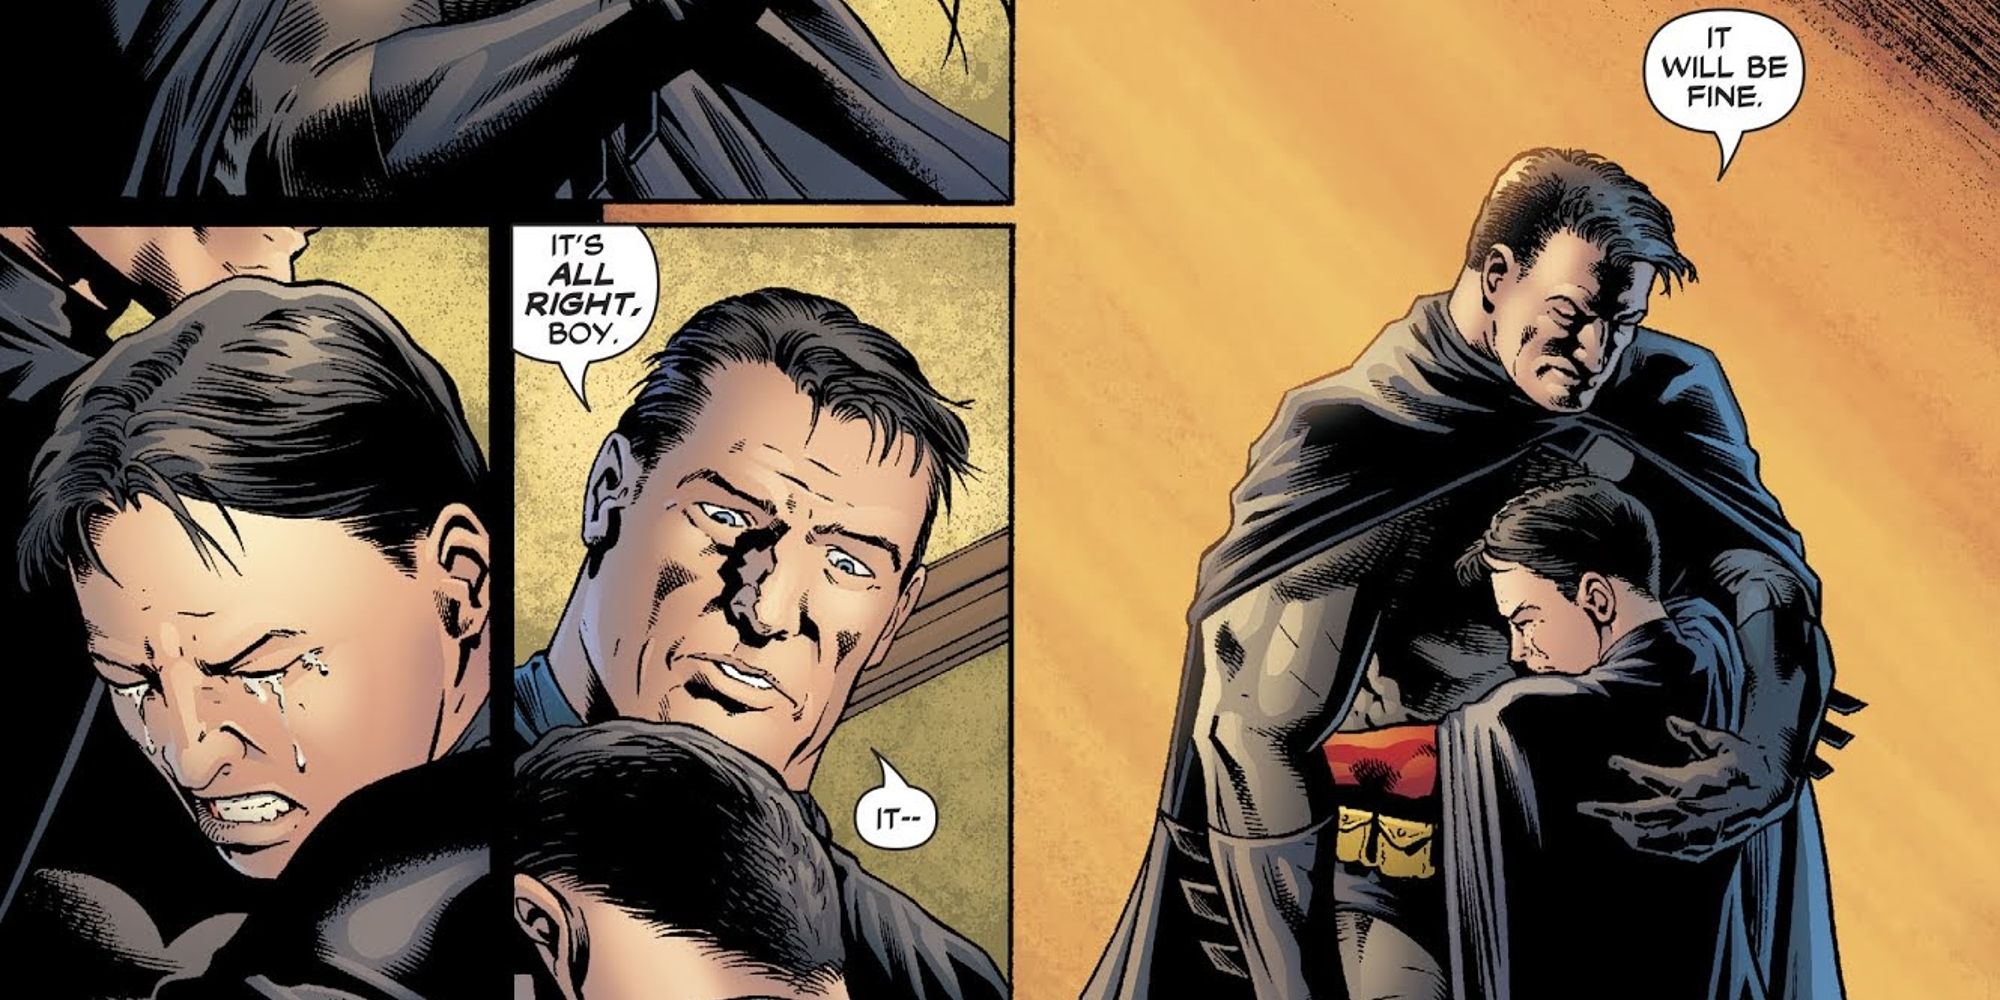 Bruce Wayne hugging Tim Drake as his newly adopted son in Batman Face To Face